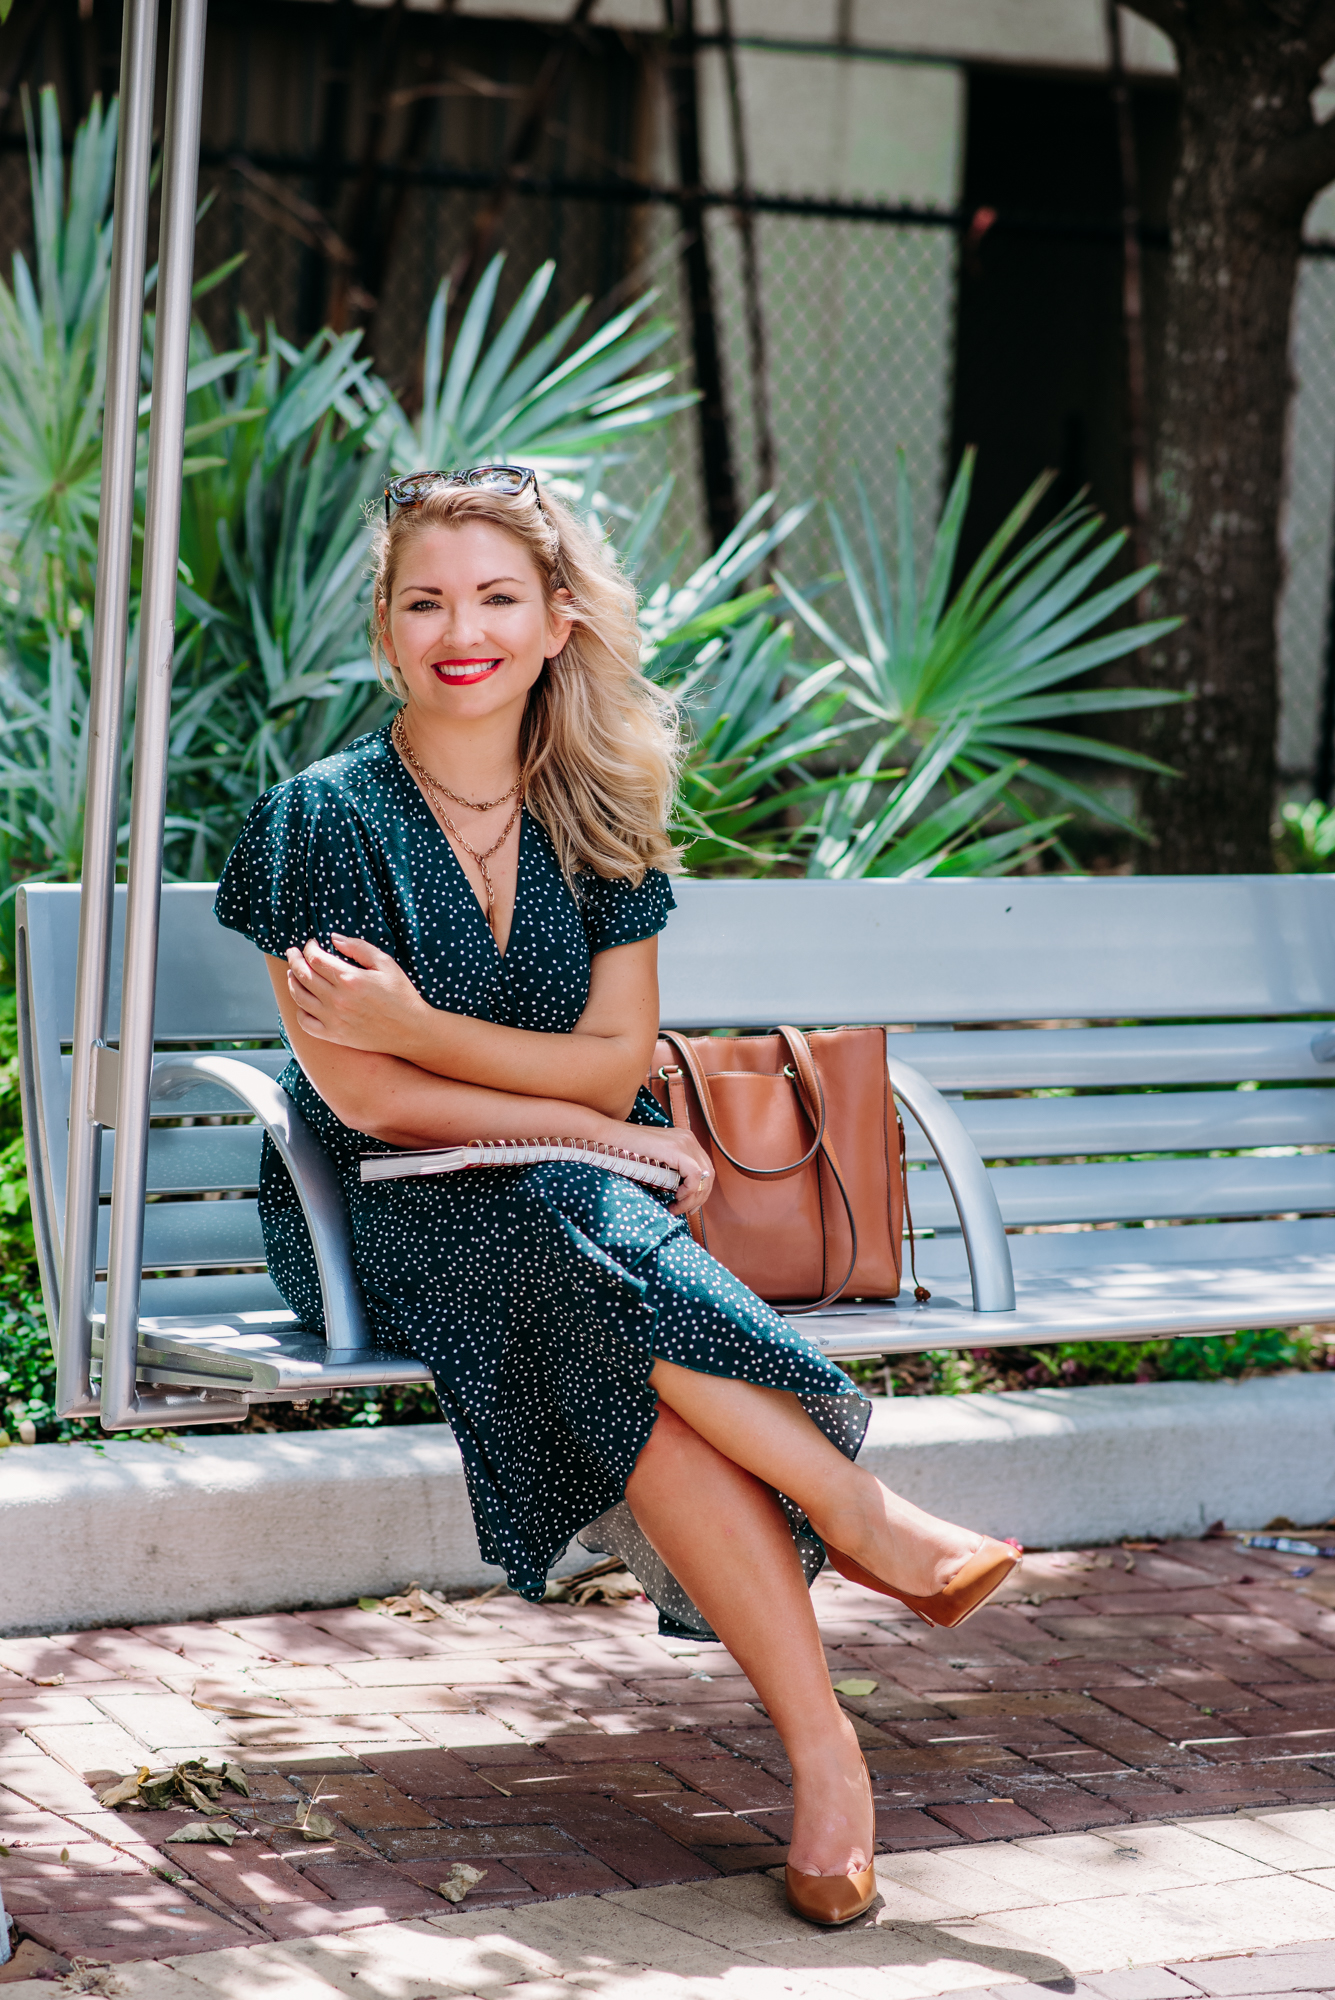 A life coach sitting on a bench in her personal brand photoshoot, confidently donning a stylish green polka dot dress.